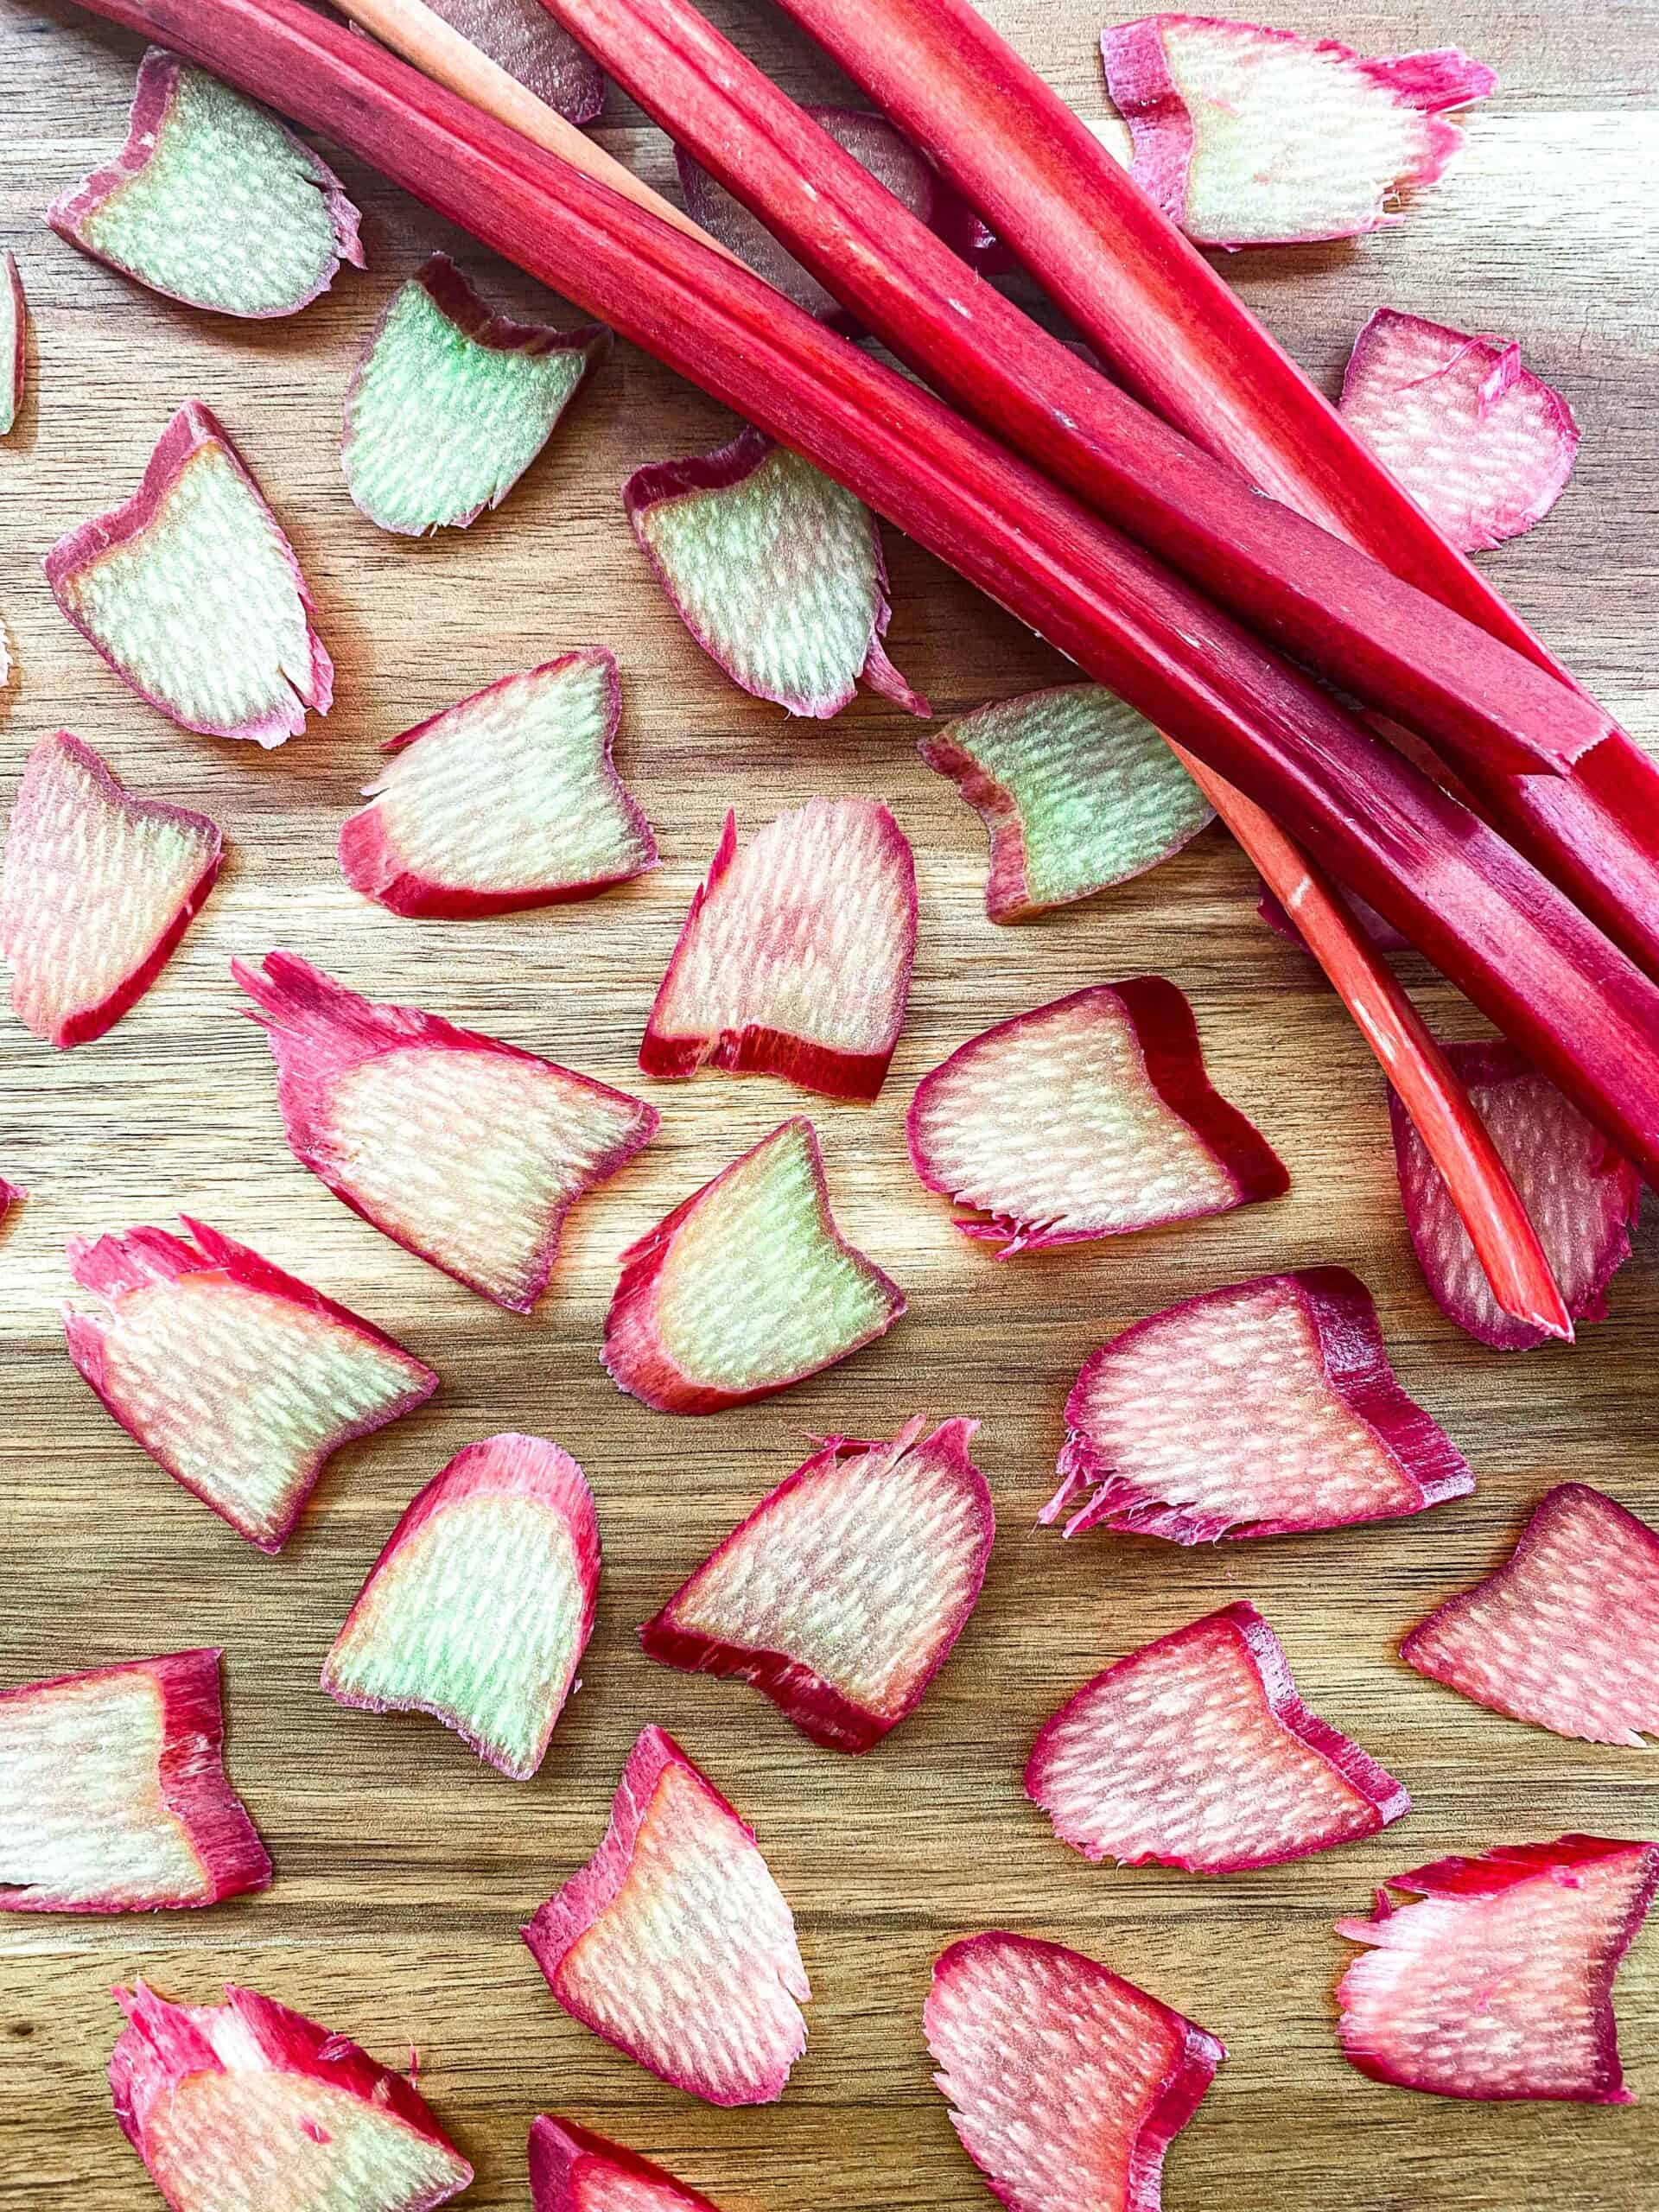 Thinly sliced rhubarb medallions with rhubarb stocks on a wooden backdrop.